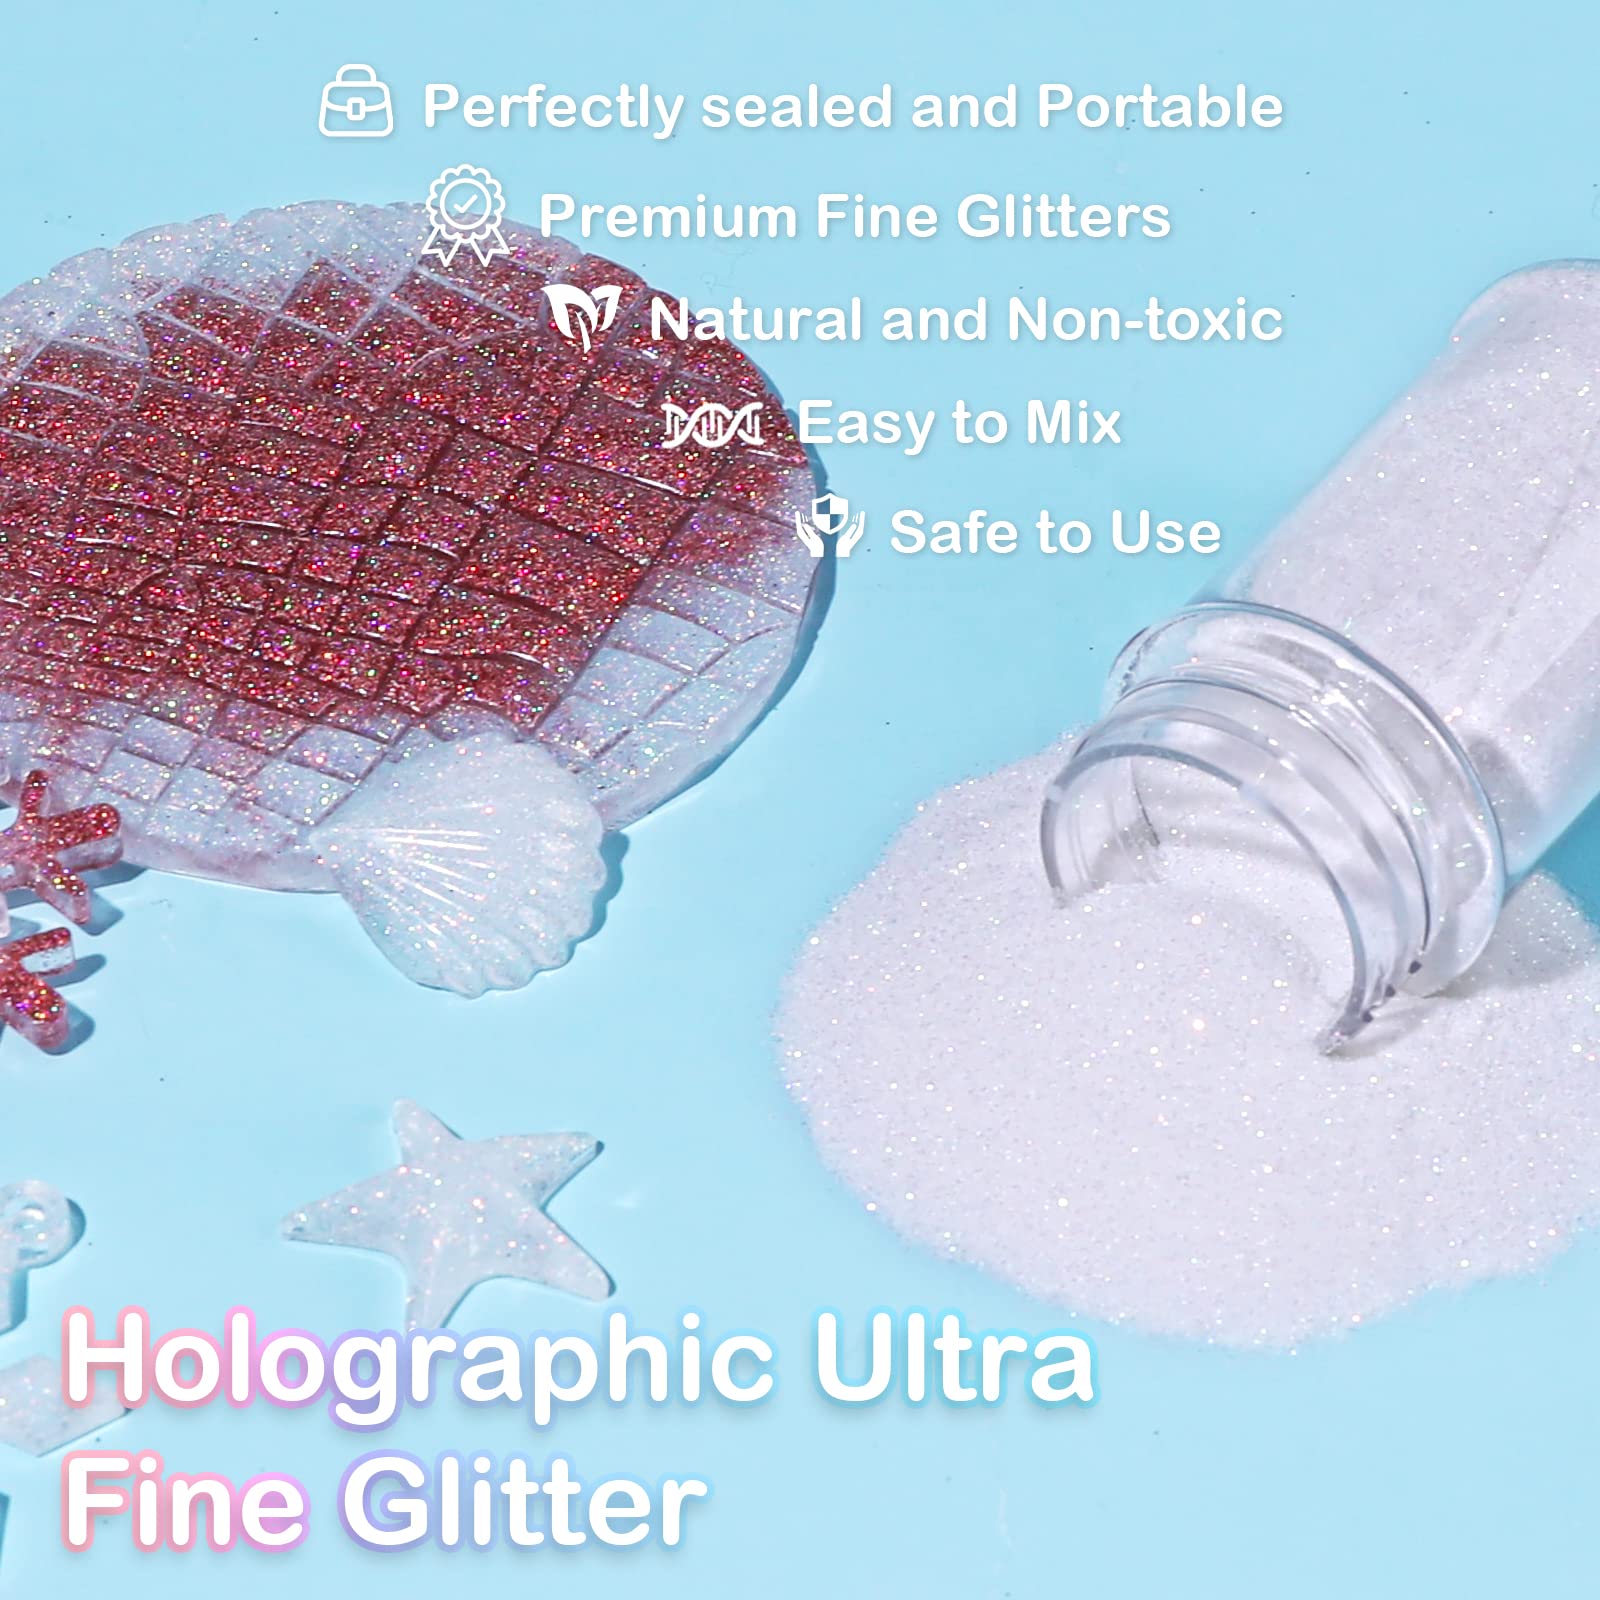 HTVRONT Holographic Fine White Glitter - 50g/1.76oz Glitter for Resin, Non-Toxic Fine Glitter for Nails, Resin, Candle Making, Crafts